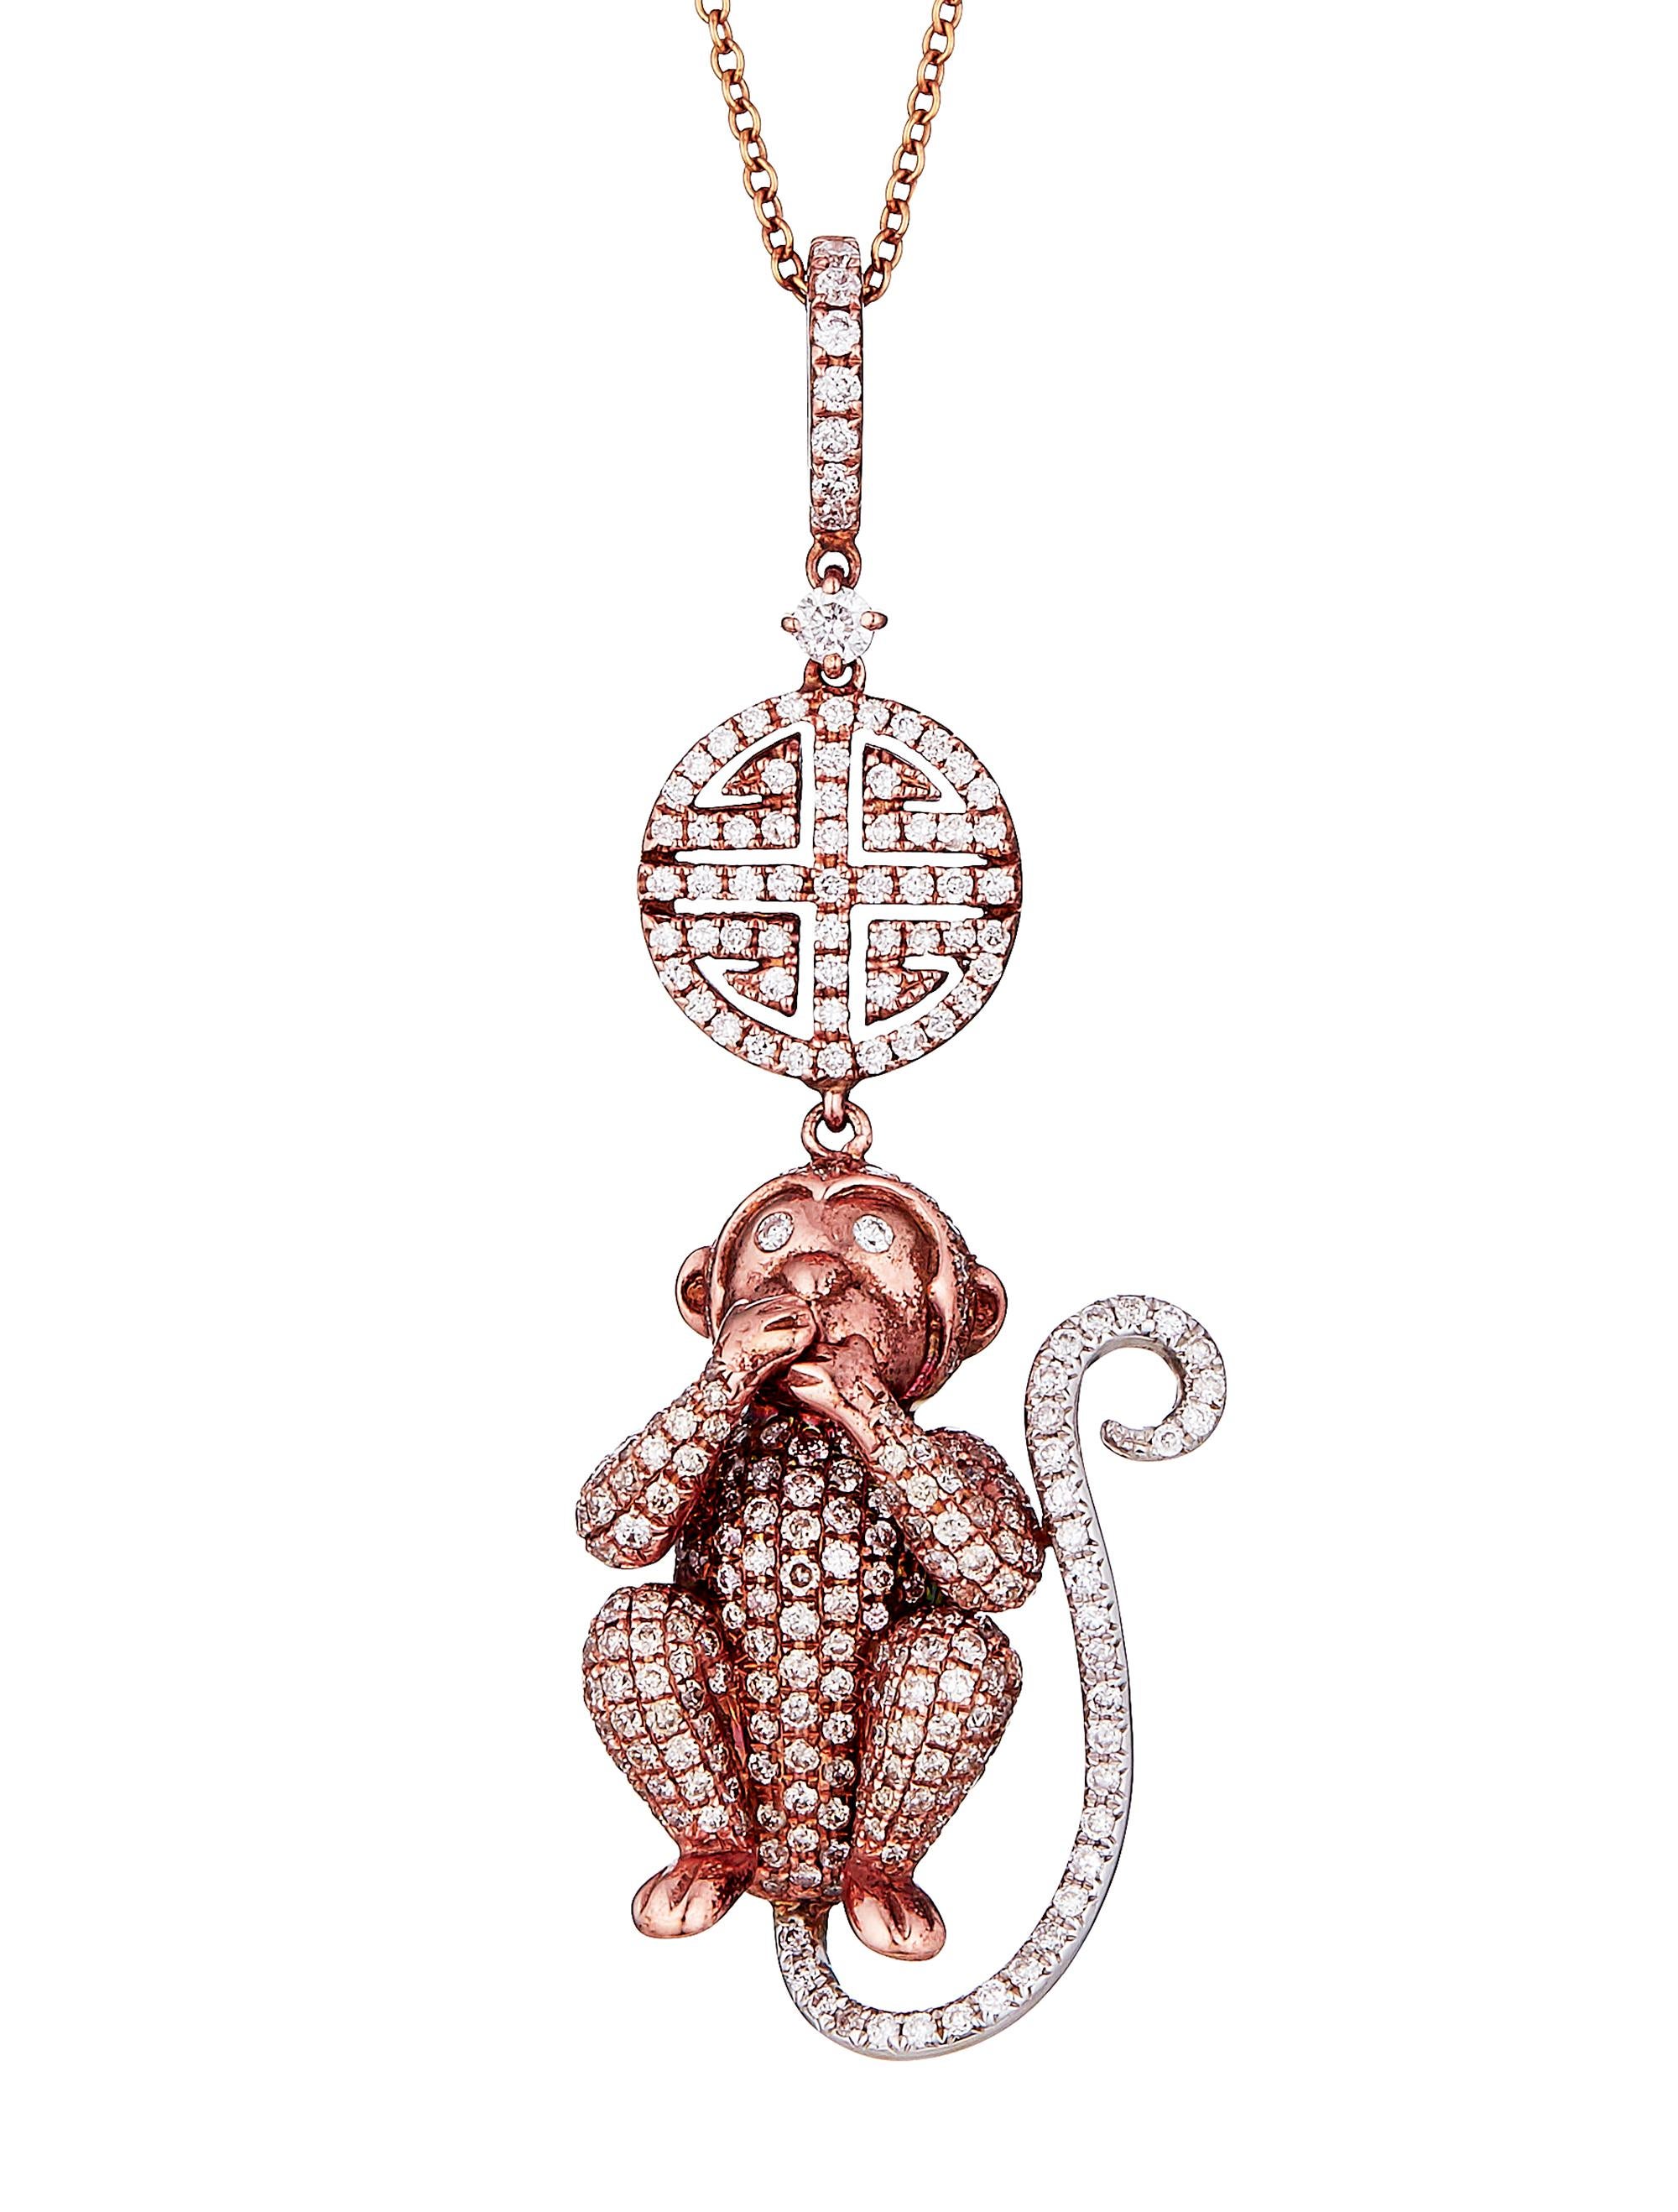 18K yellow gold Lorraine Schwartz white and yellow diamond Speak No Evil monkey pendant necklace with rolo chain and 14K yellow gold lobster clasp closure.

Metal Type: 14K Yellow Gold, 18K Yellow Gold
Hallmark: 750 
Signature: L.S.
Carat Weight: